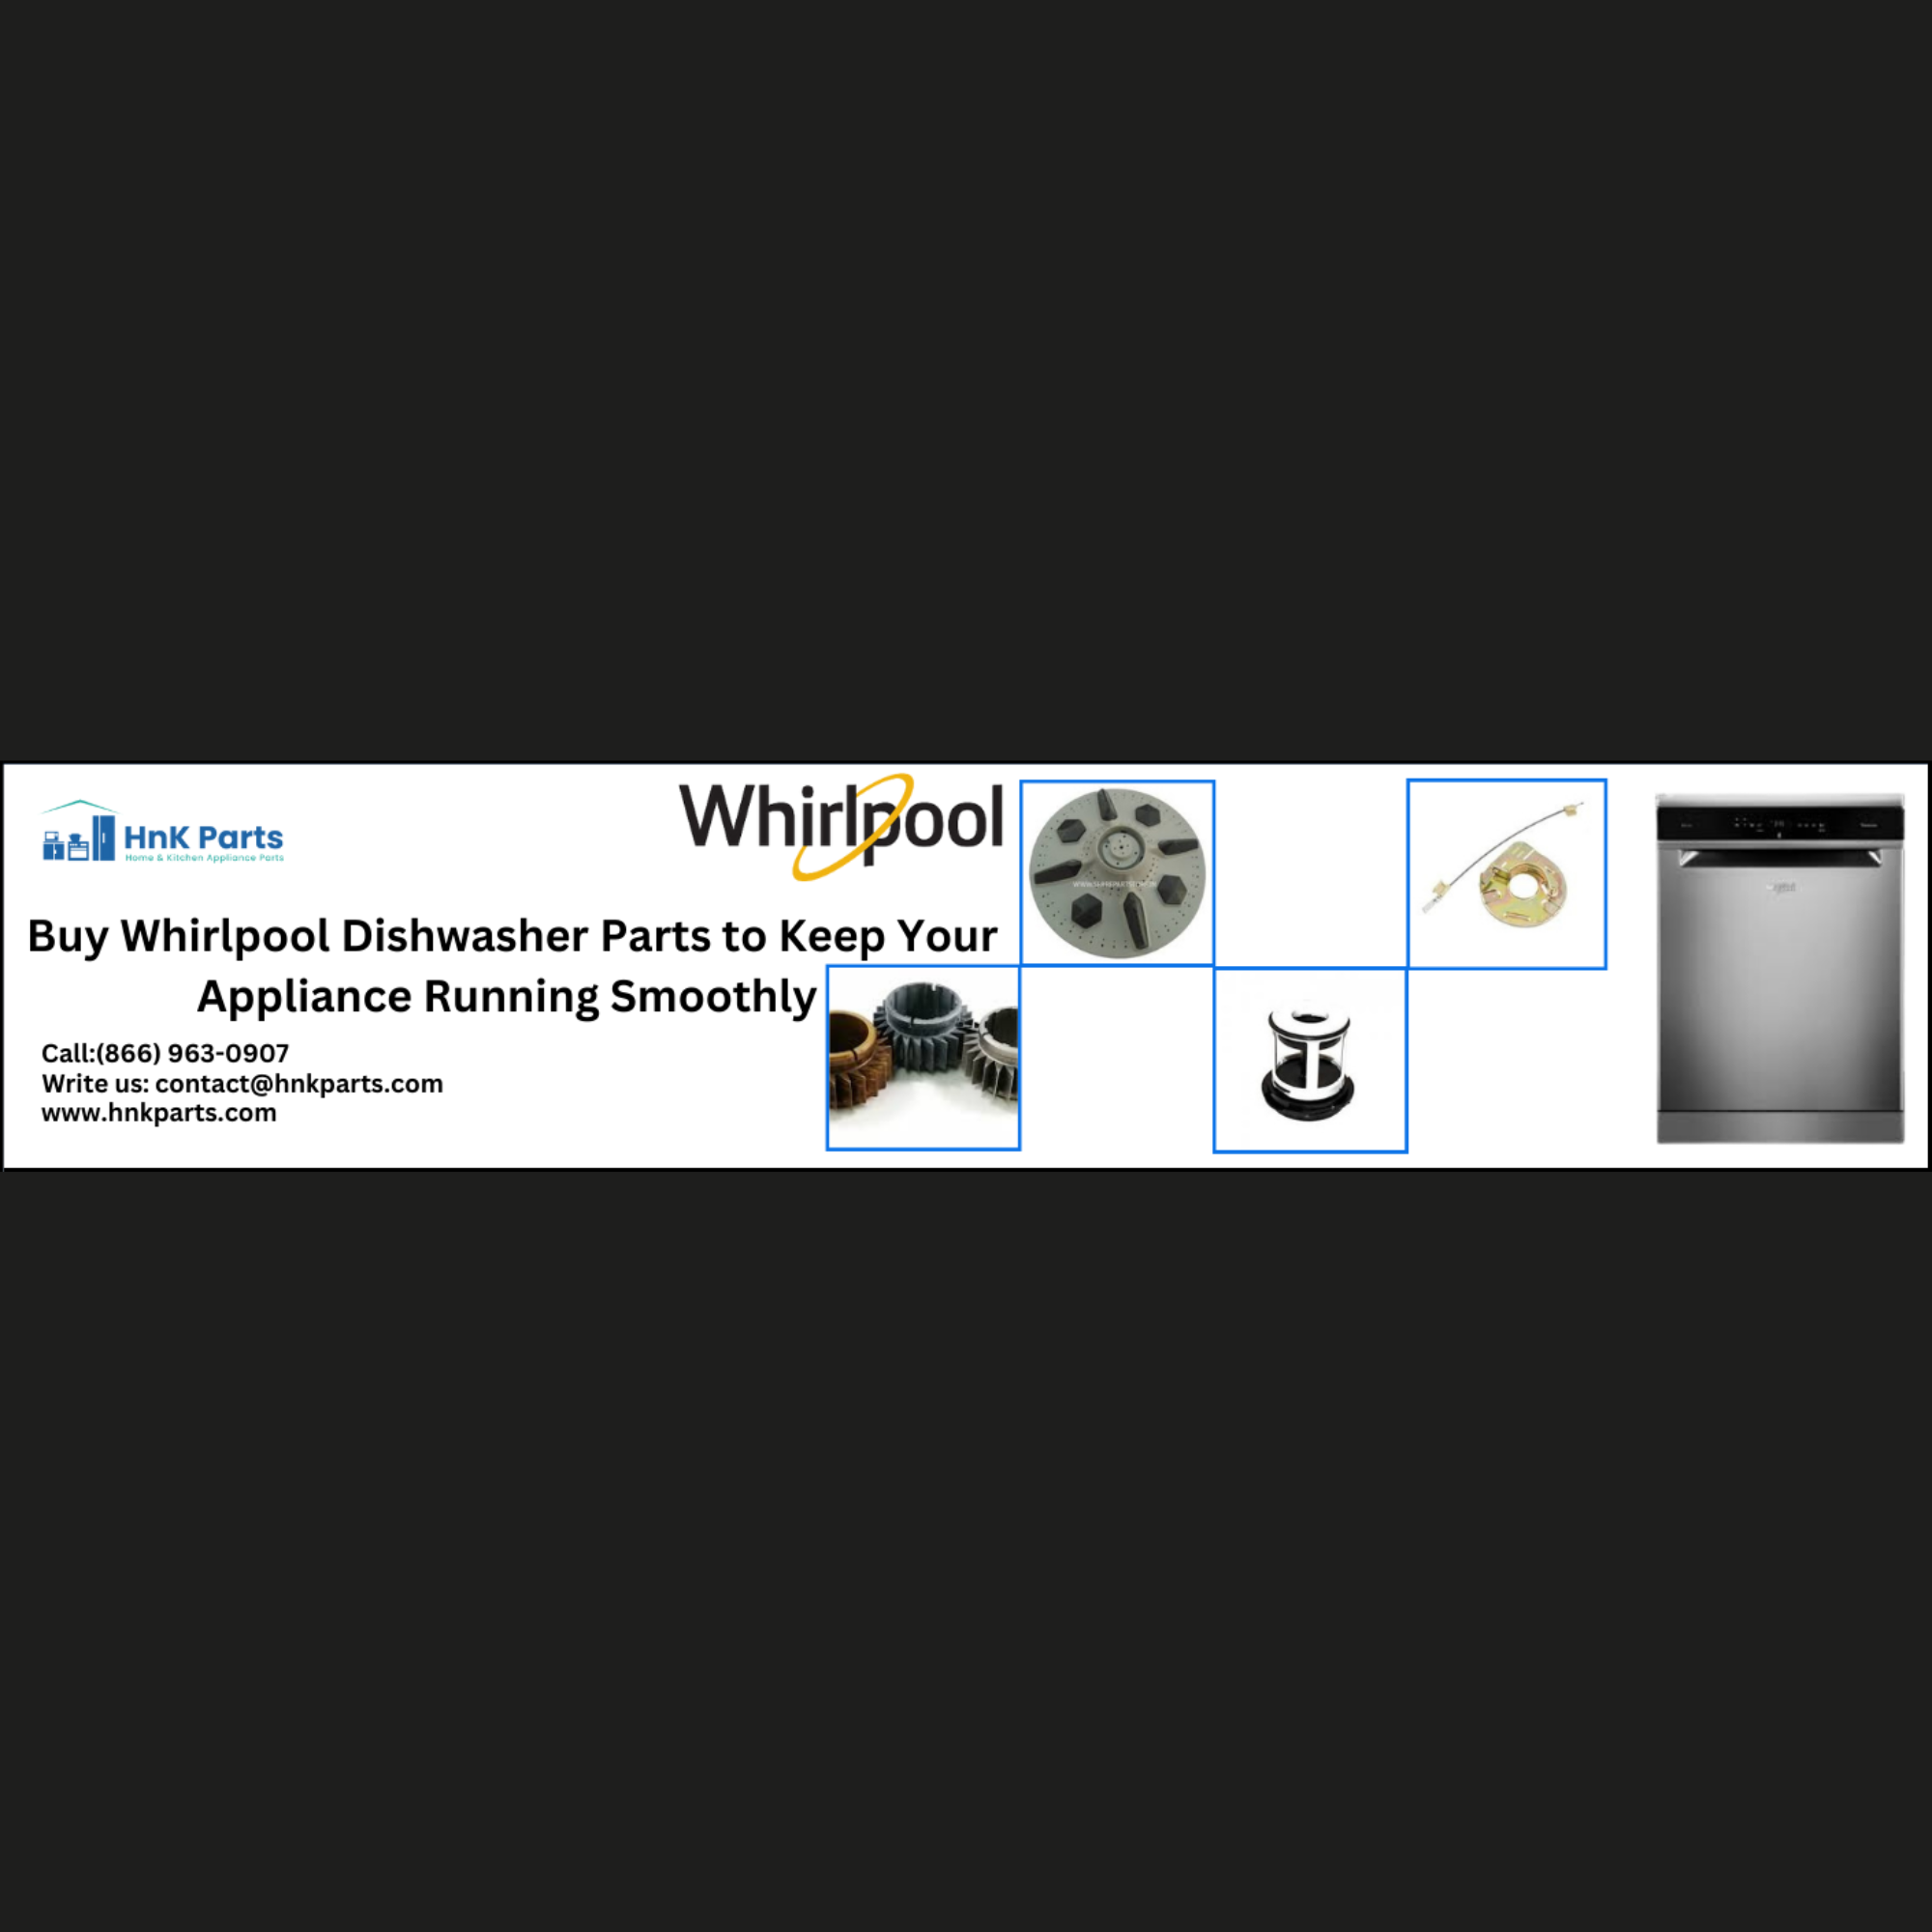 Whirlpool Dishwasher Parts - HnKParts - Chicago Tools, Equipment